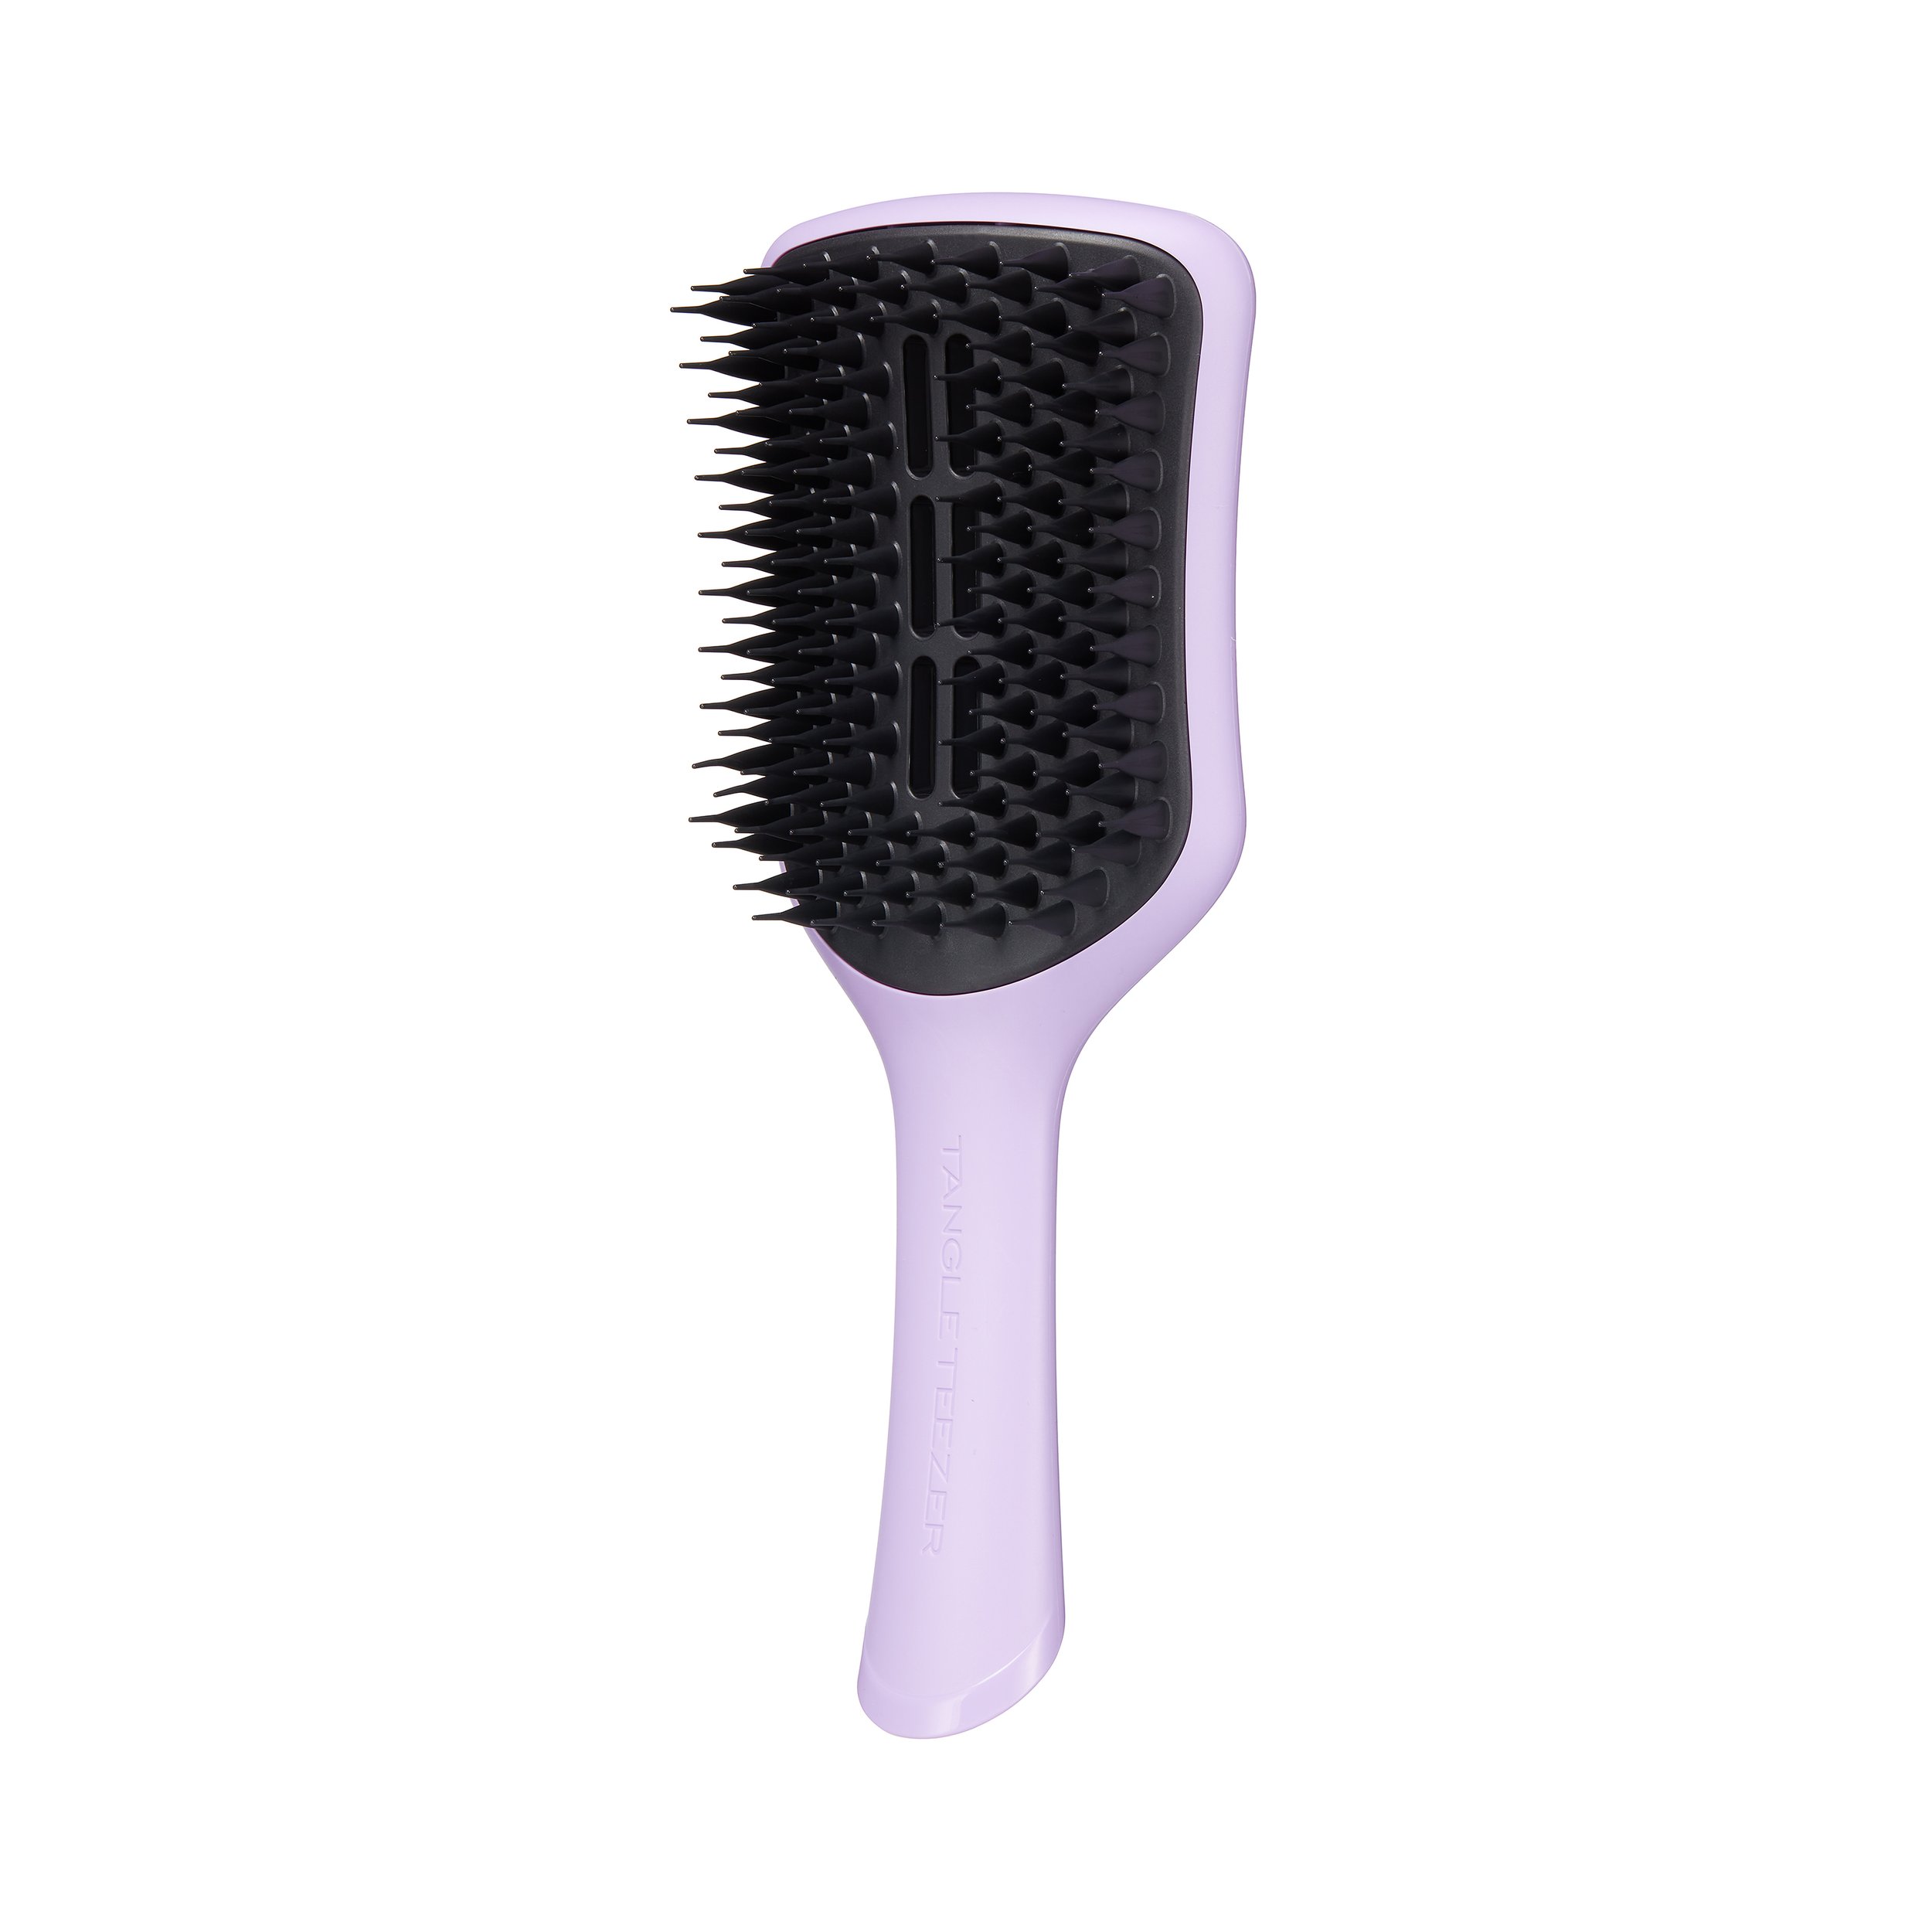 7.Tangle Teezer The Easy Dry &amp; Go Large €24.99,